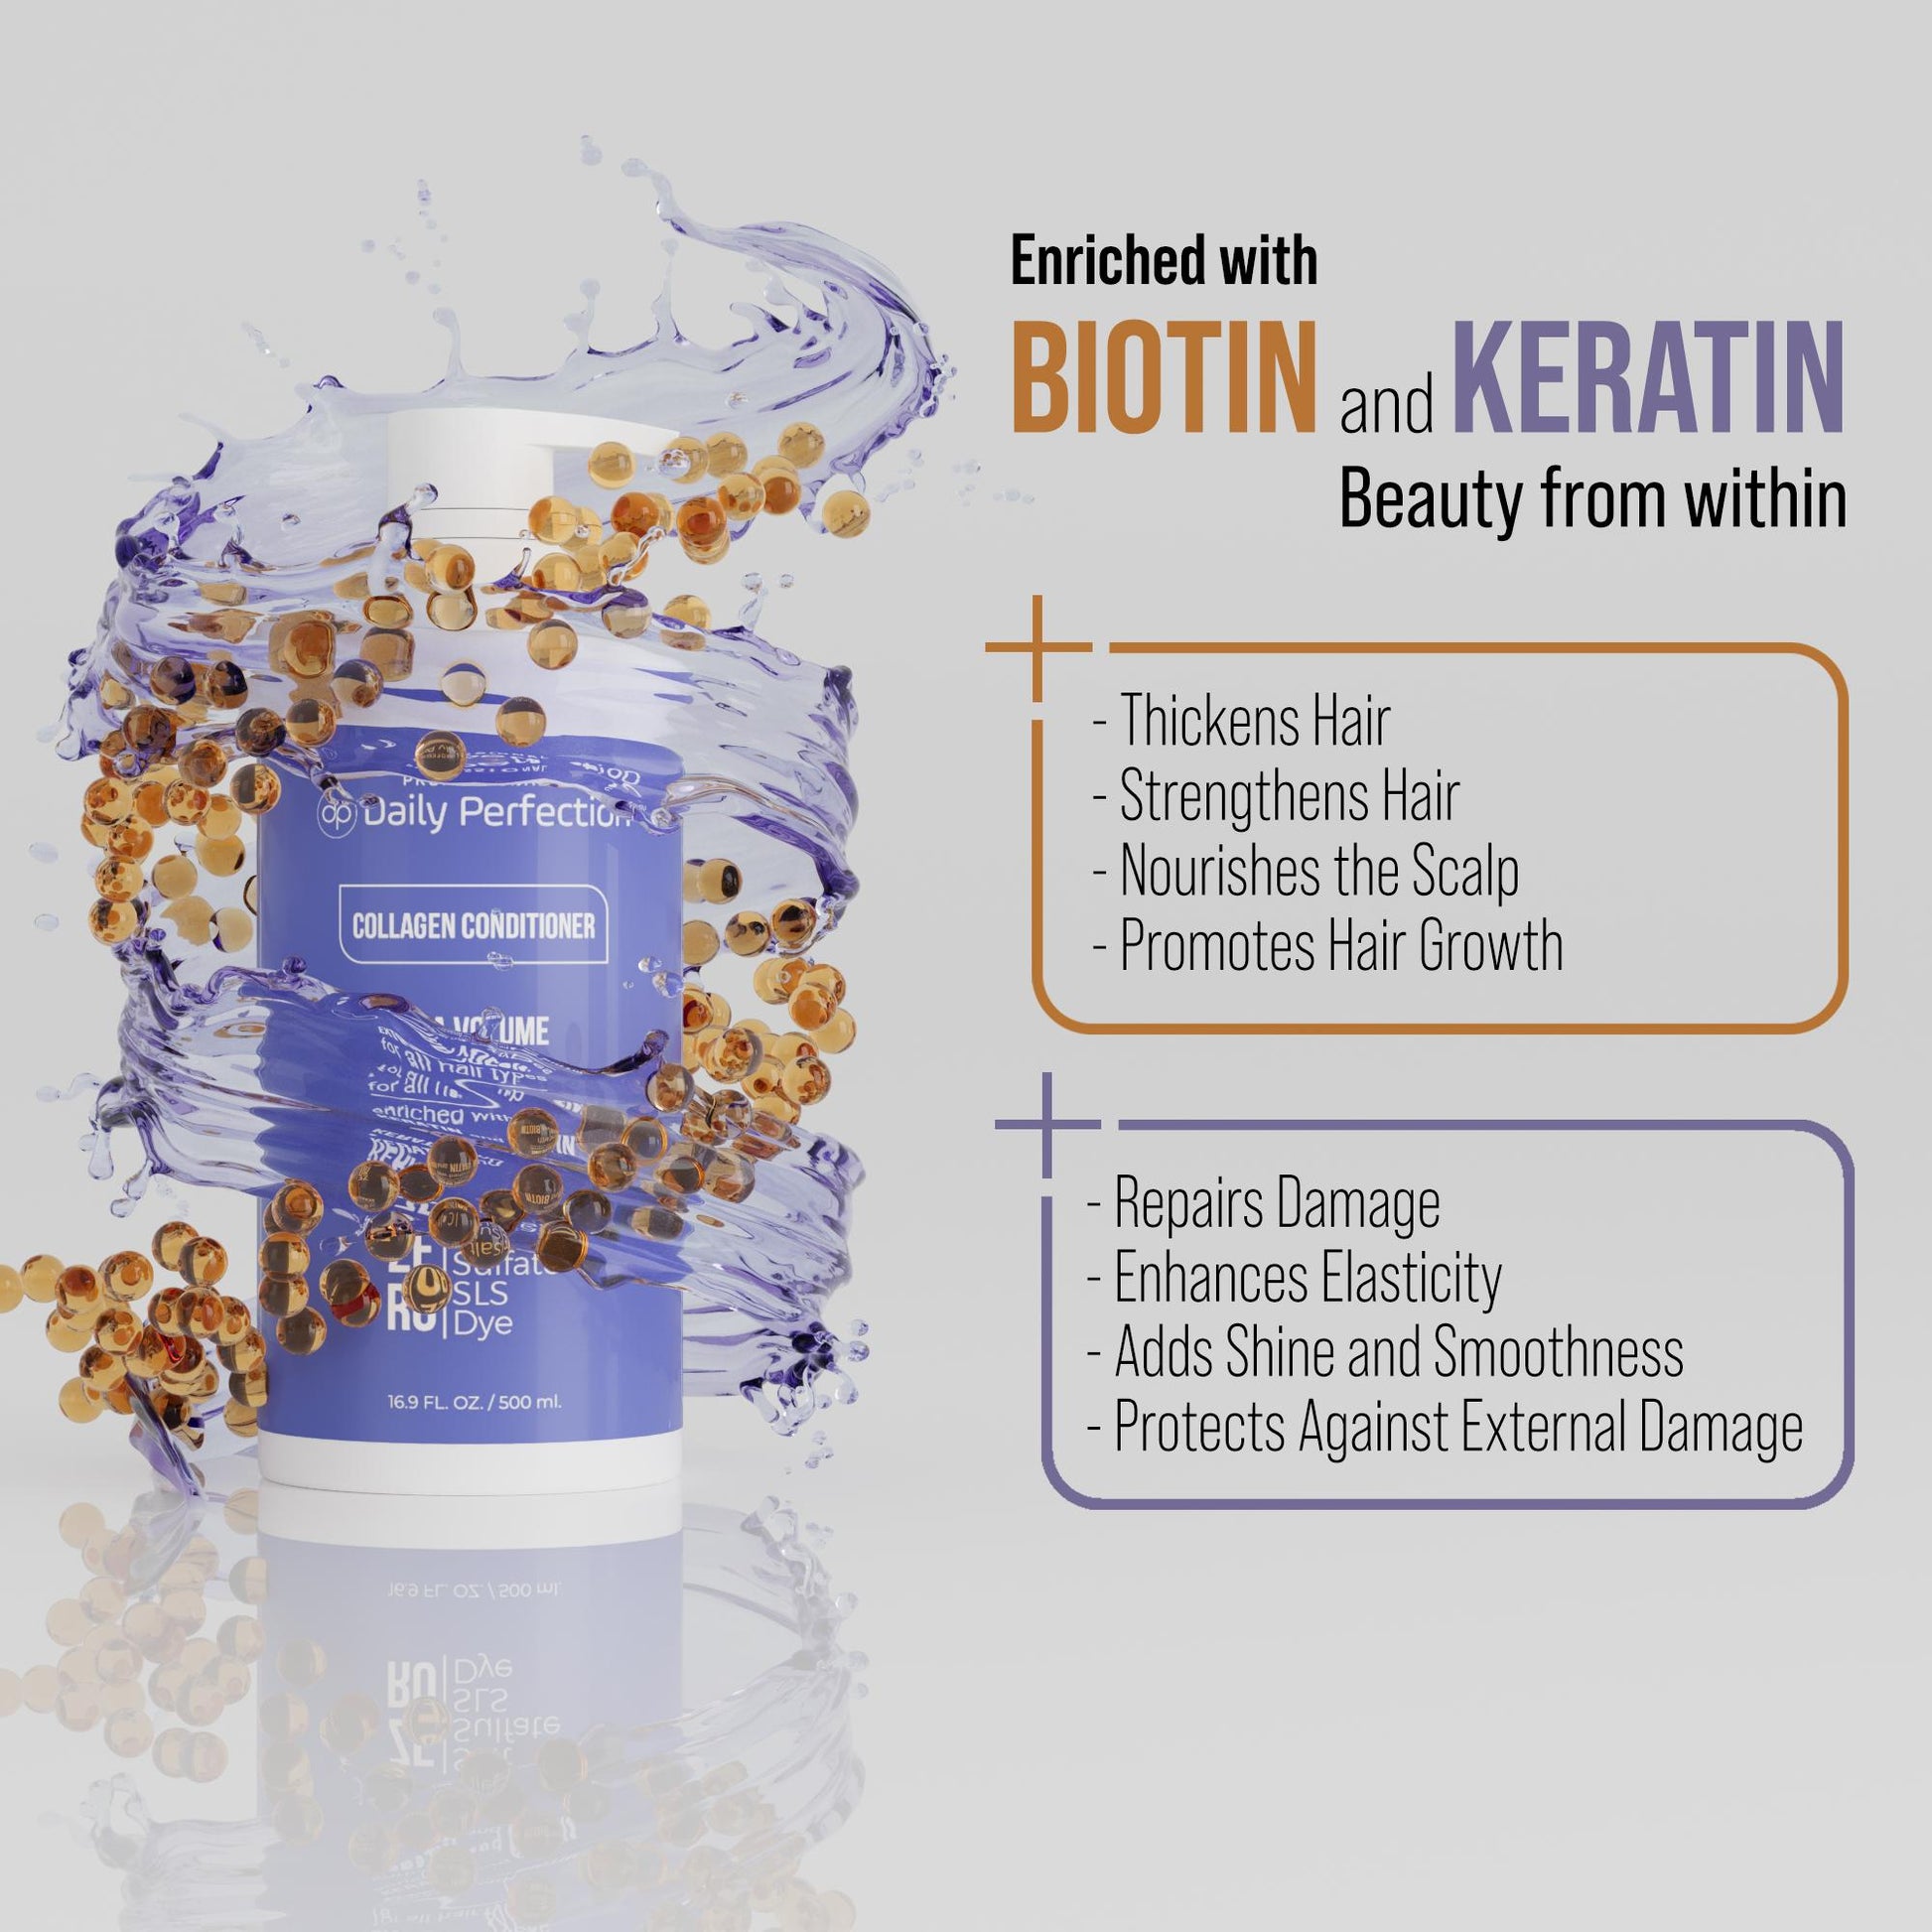 infographic explains the benefits of biotin and kertain boosts which are used in Daily Perfection Collagen Conditioner